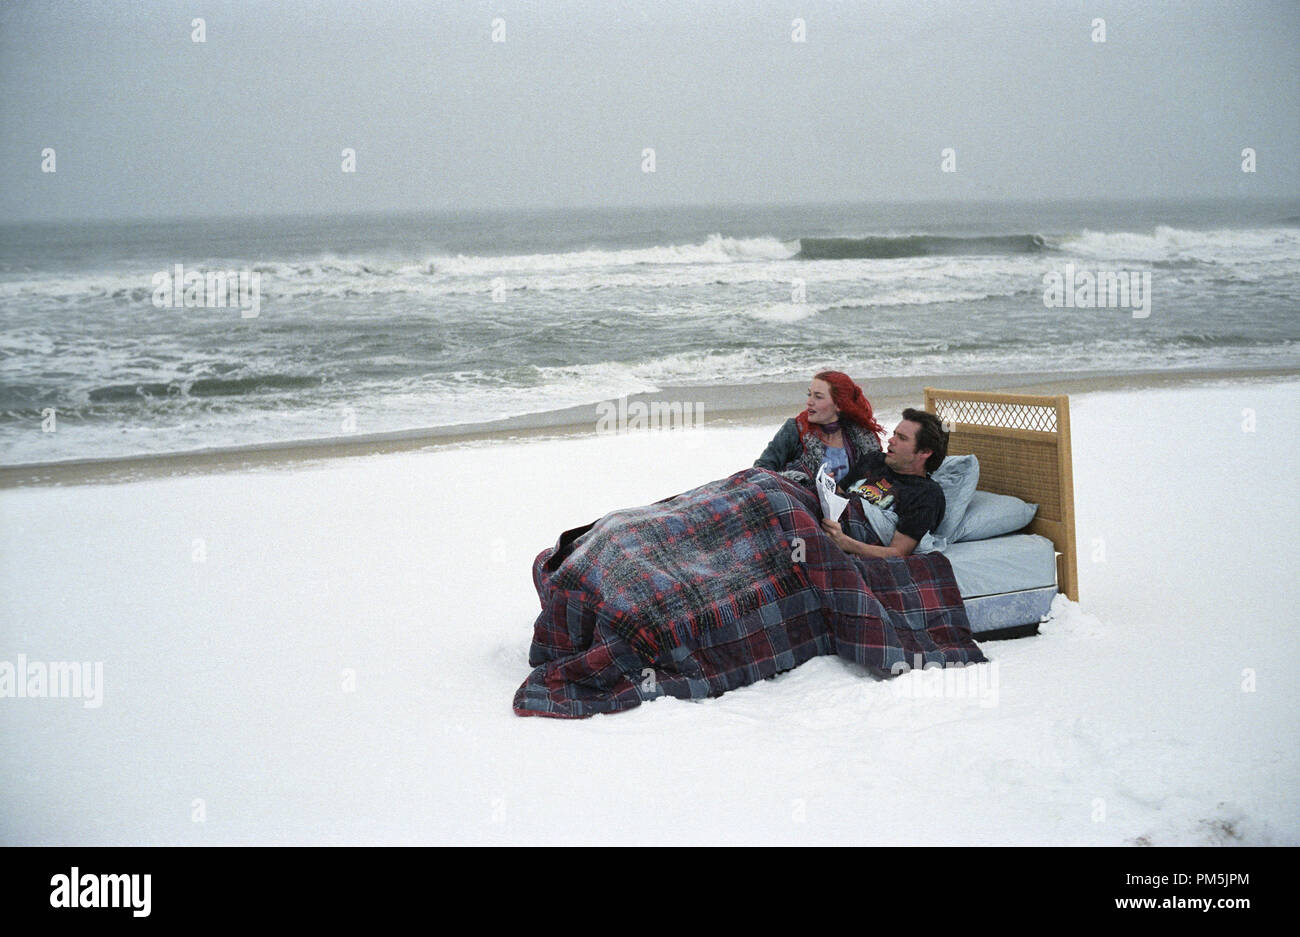 Film Still / Publicity Still from 'Eternal Sunshine of the Spotless Mind' Jim Carrey, Kate Winslet Photo Credit: David Lee © 2004 Focus Features Stock Photo